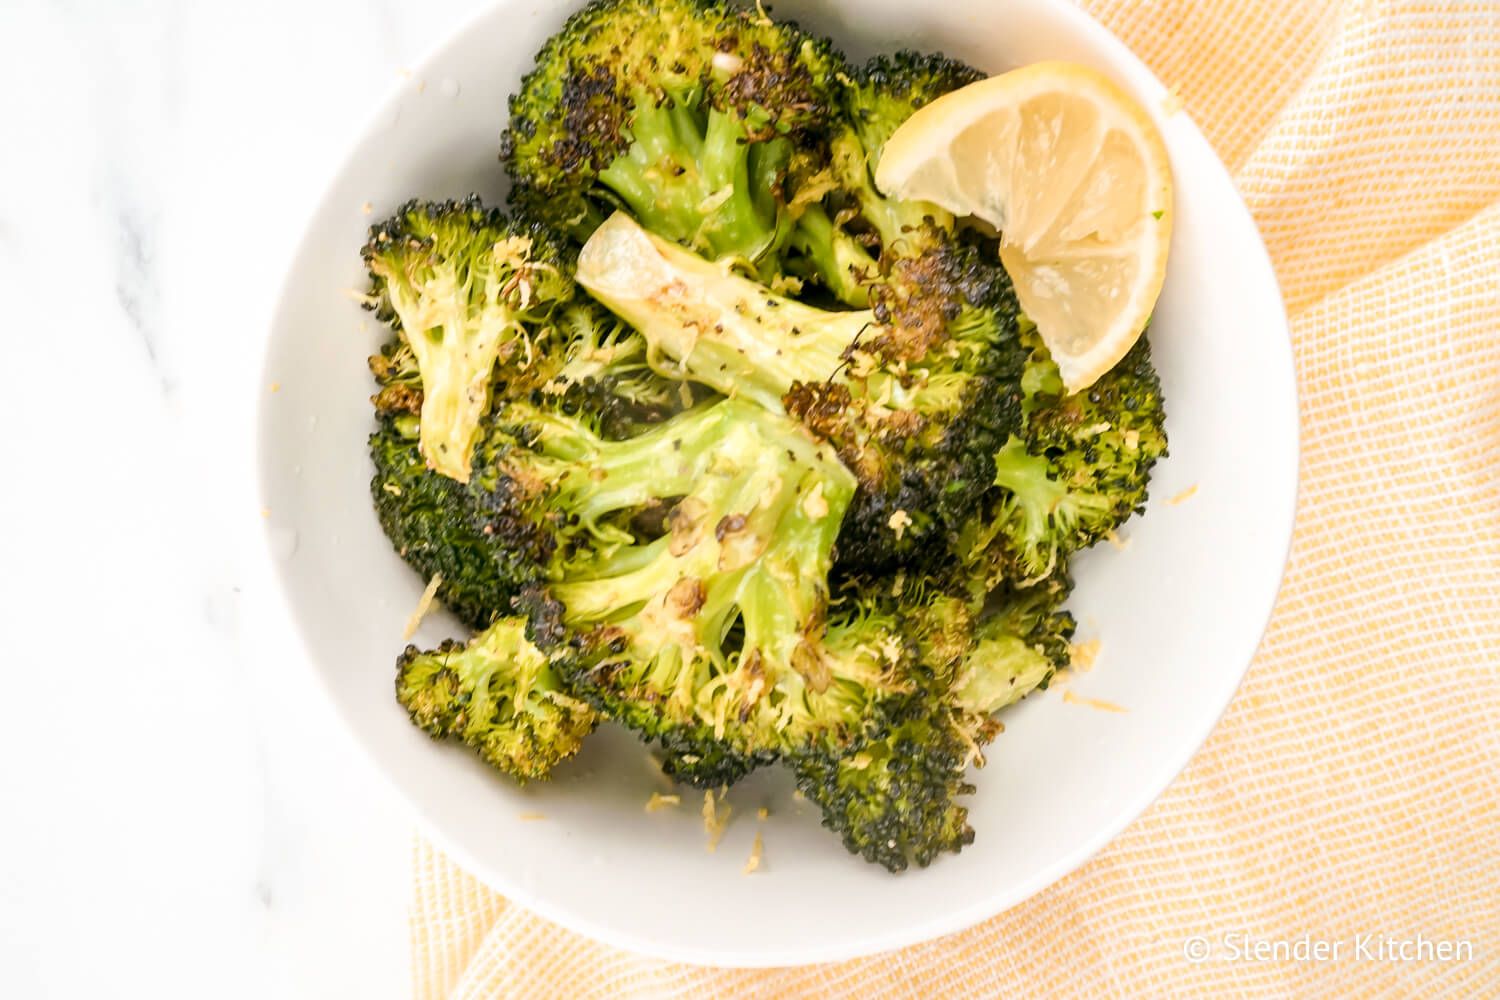 Roasted broccoli with garlic and lemon in a bowl.